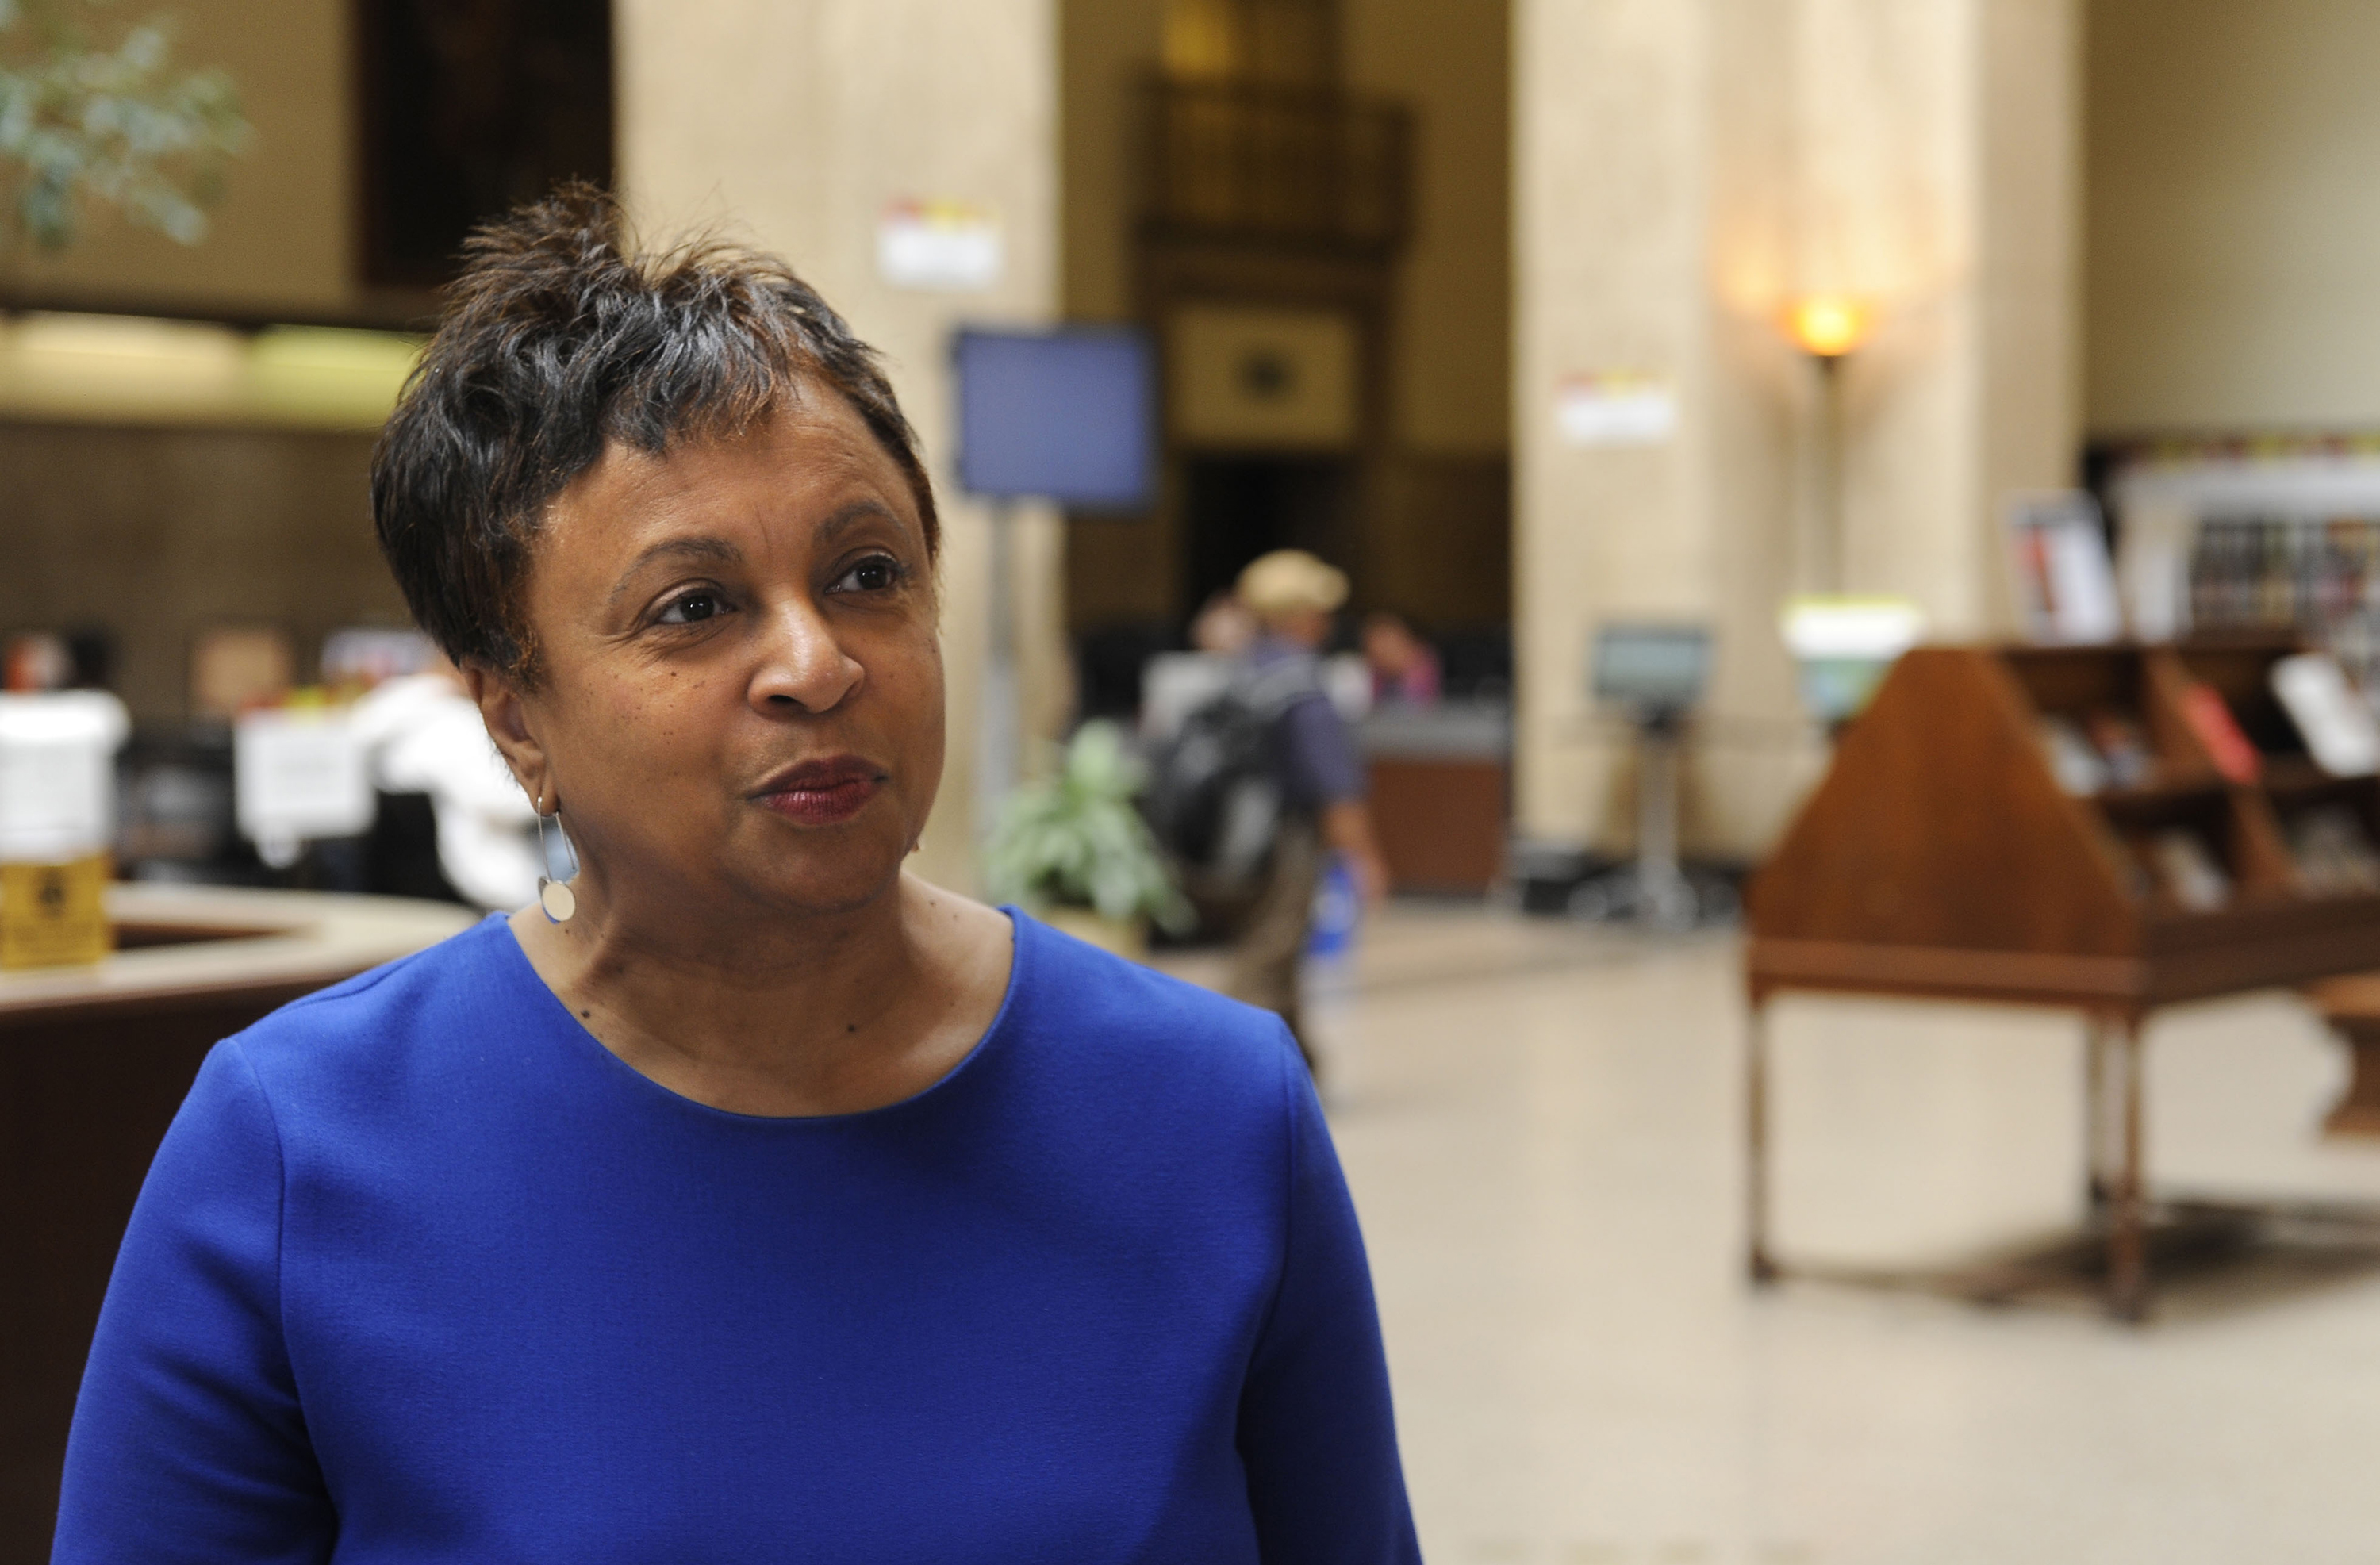 Carla Hayden, in an April 2015 file image, is confirmed by the Senate on Wednesday, July 13, 2016, to head the Library of Congress. Hayden is the longtime leader of Baltimore's library system. (Barbara Haddock Taylor/Baltimore Sun/TNS via Getty Images) (Baltimore Sun&mdash;TNS via Getty Images)